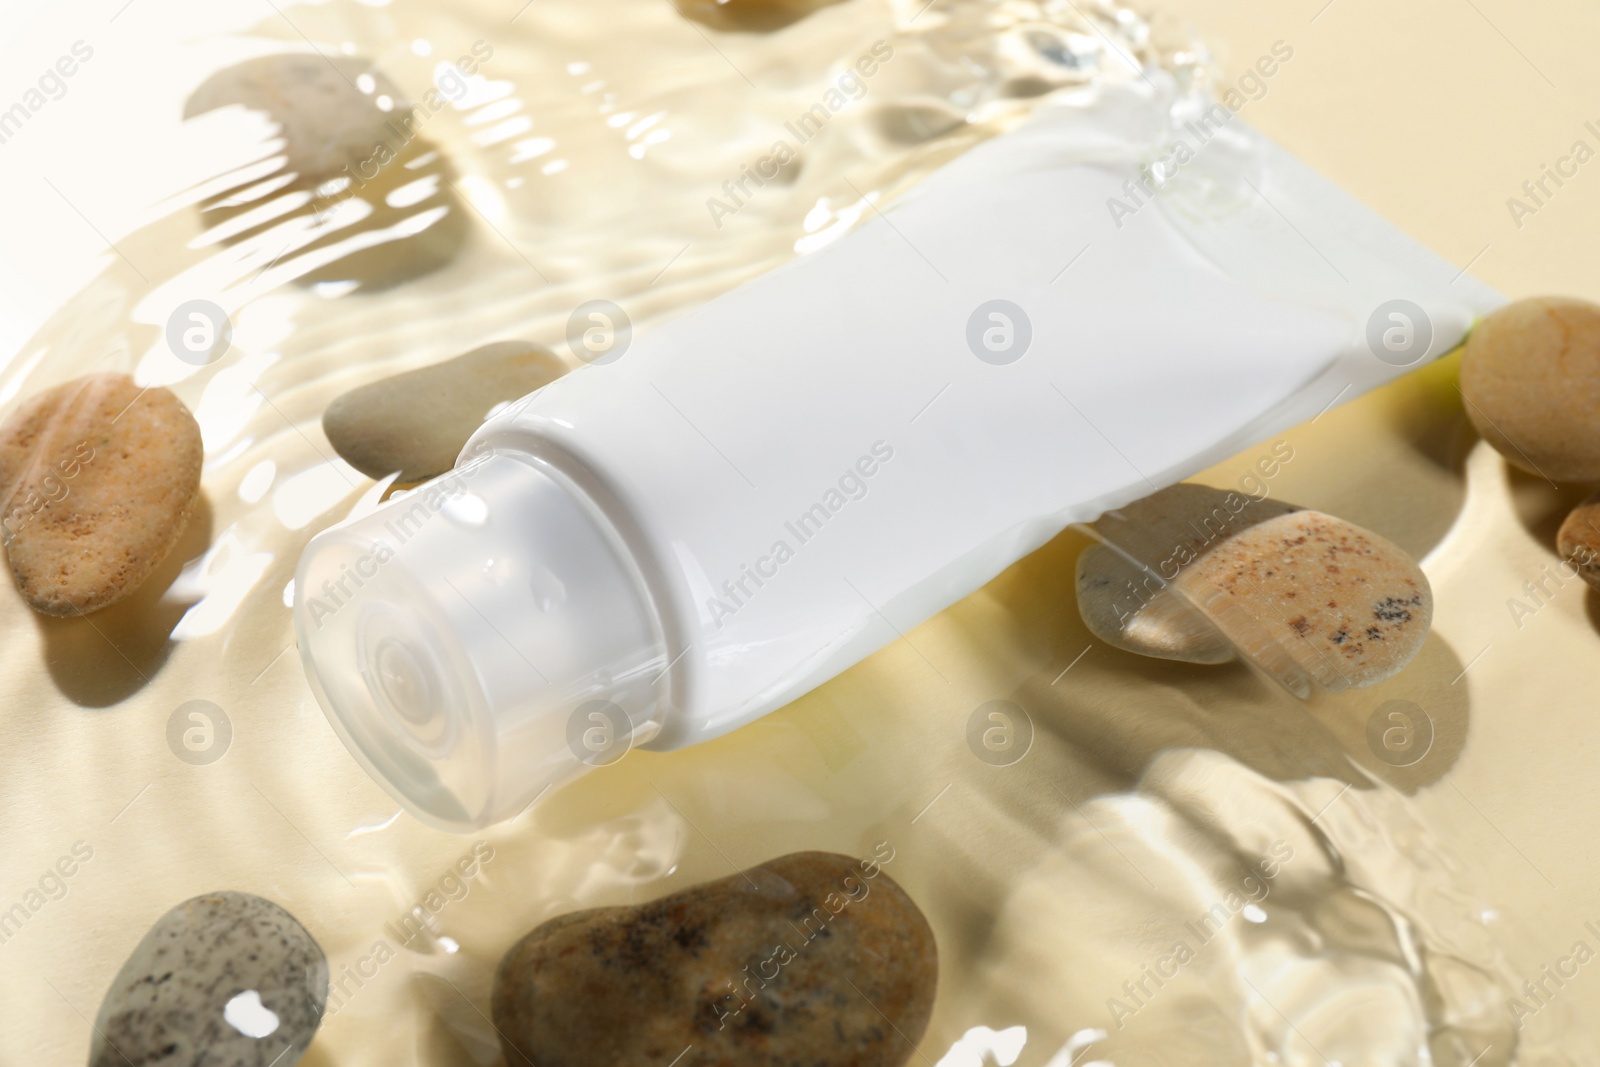 Photo of Tube of face cleansing product and stones in water against beige background, closeup